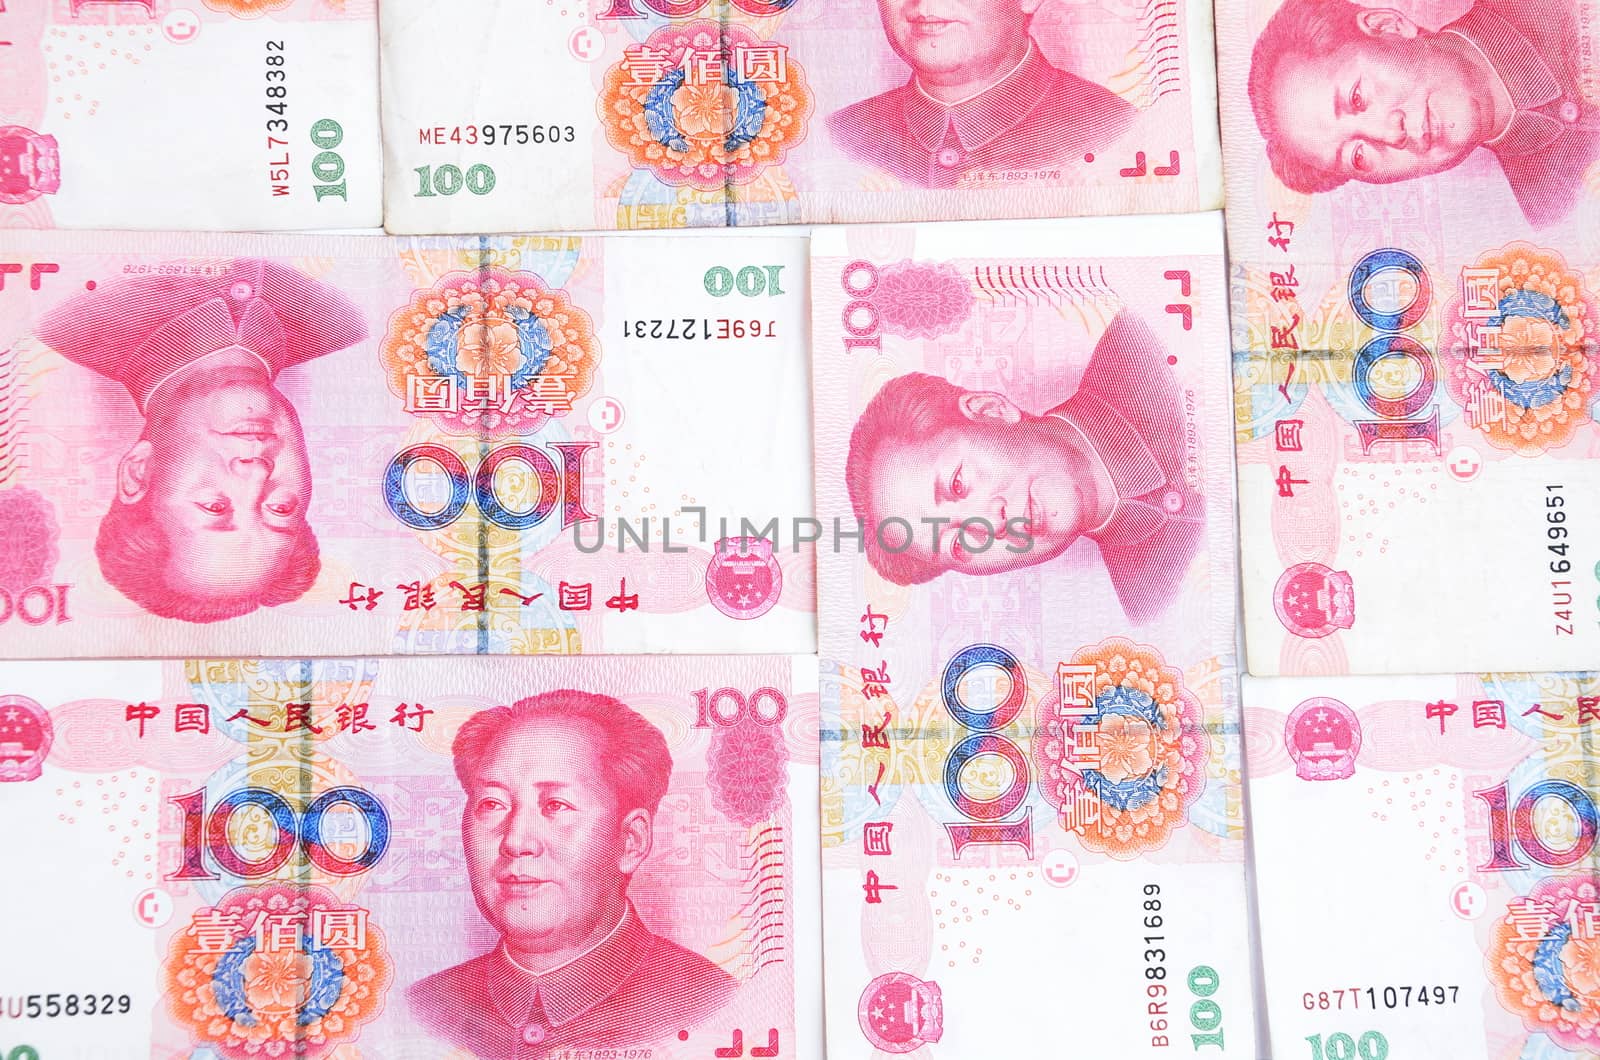 Chinese currency, Yuan, hundred RMB. Colorful photo of same banknotes with Mao Tse-Tung picture.